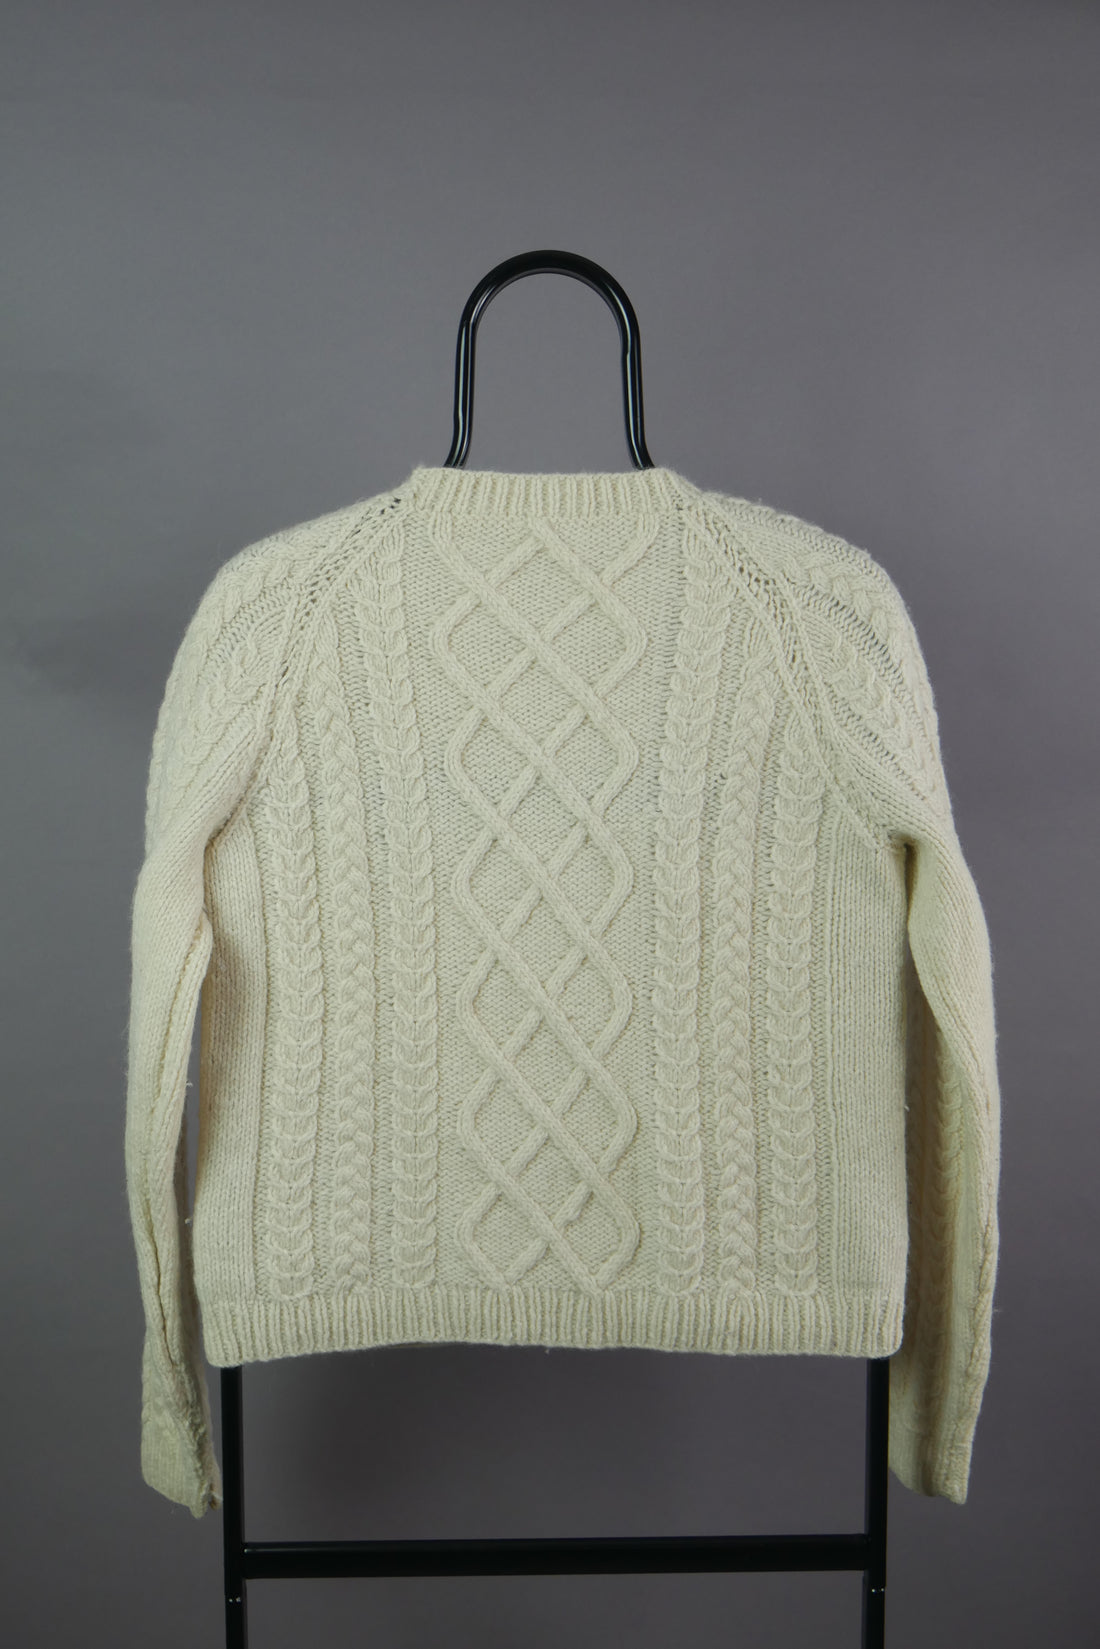 The Vintage Handknit Cable Knit Jumper (S)